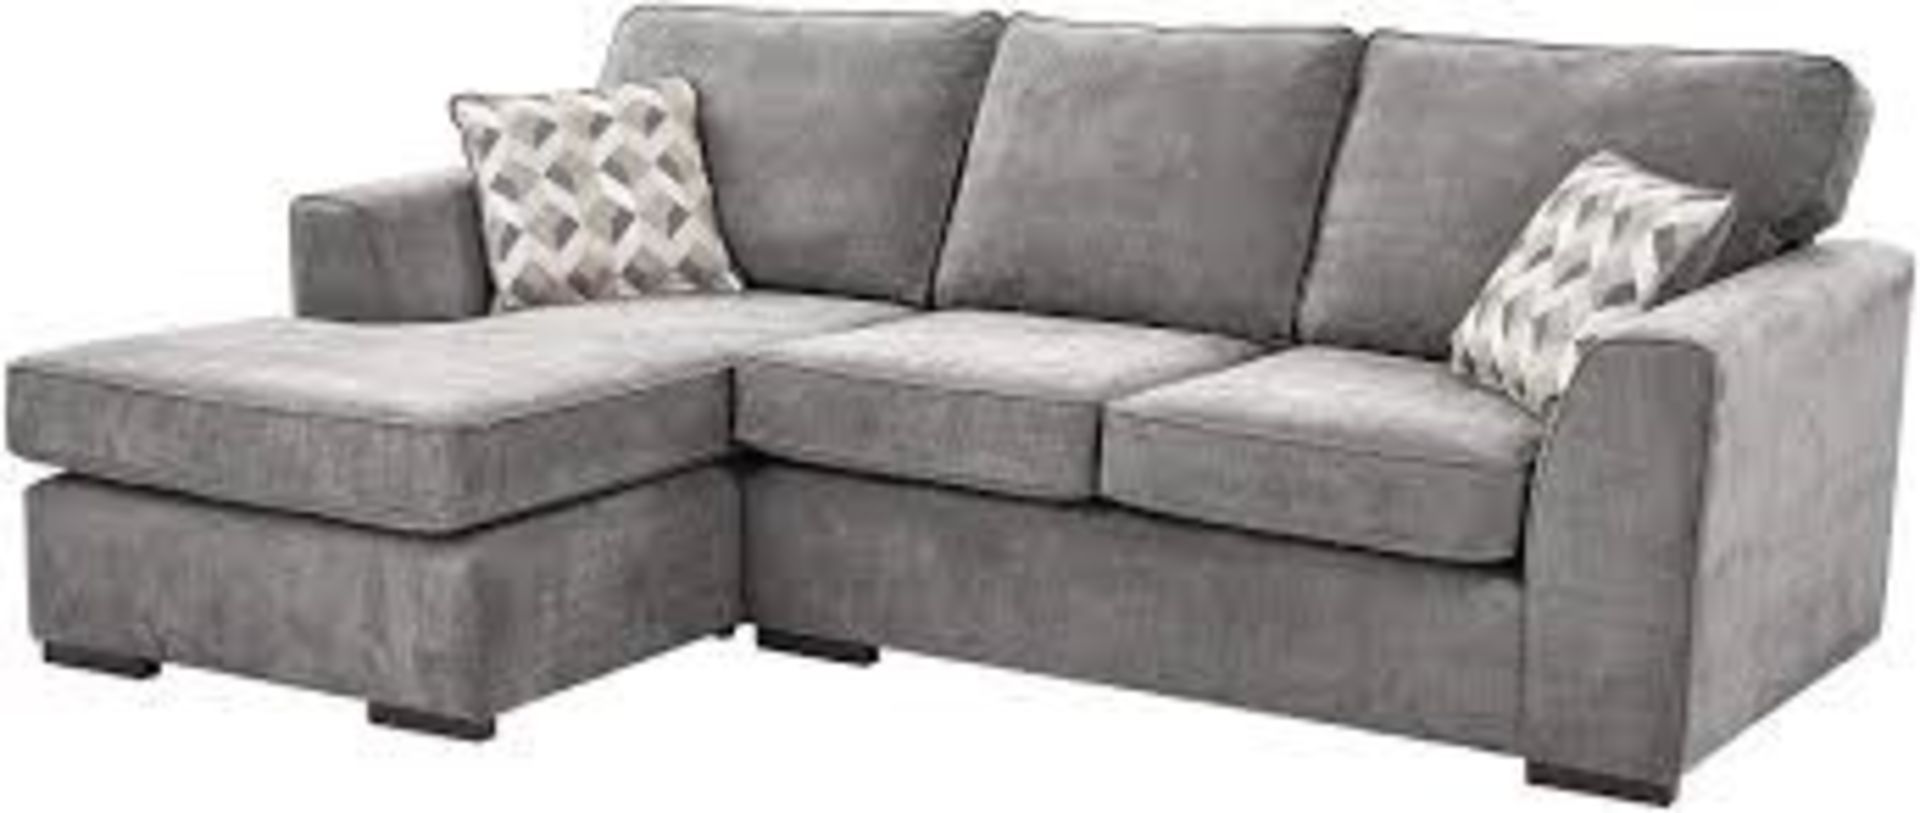 1 / BRAND NEW BAGGED BOSTON LEFT HAND CORNER SOFA IN DARK GREY (VIEWING HIGHLY RECOMMENDED)